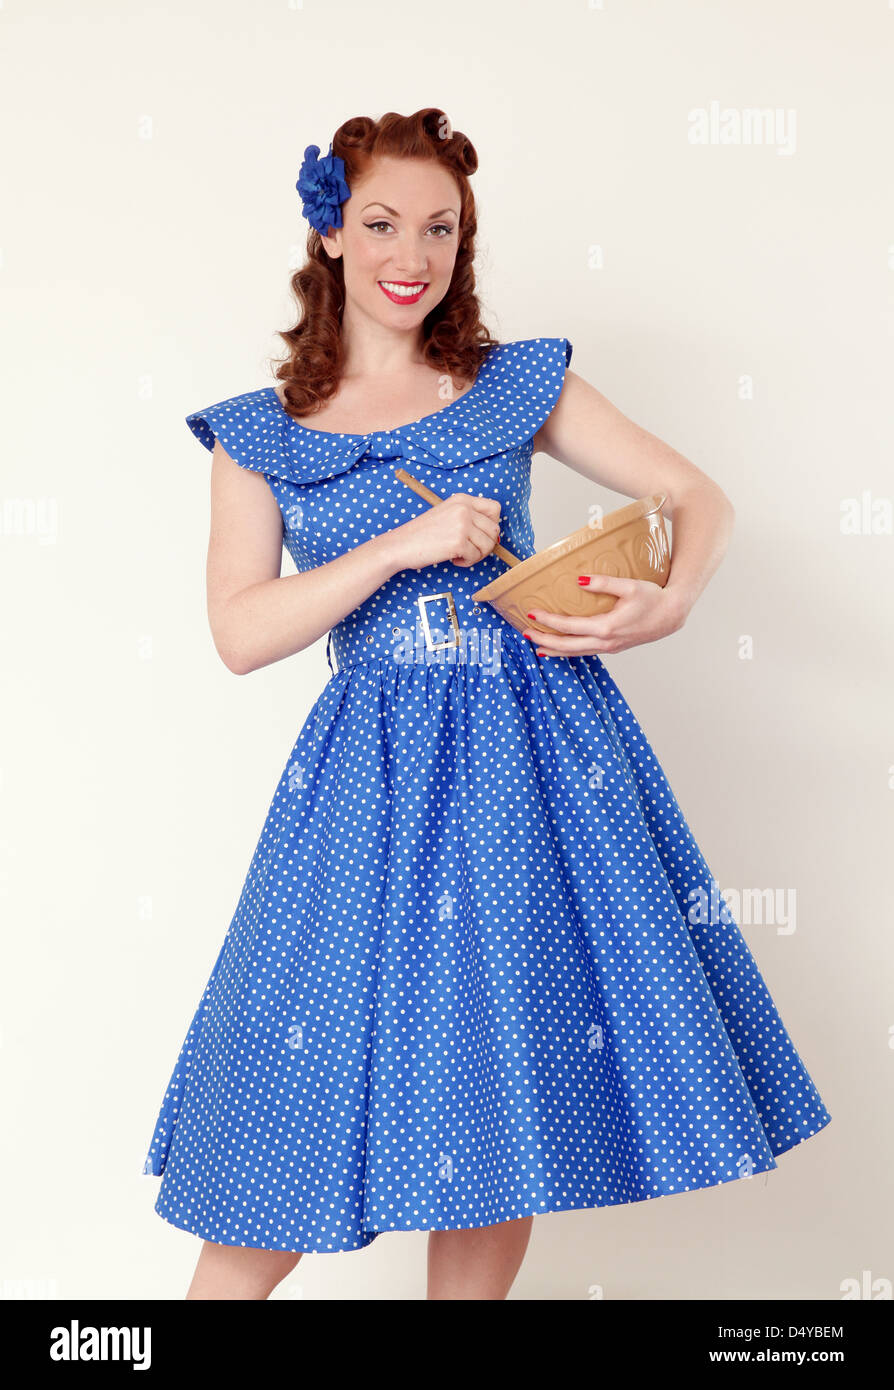 Woman in a vintage dress holding  a cookery mixing bowl Stock Photo